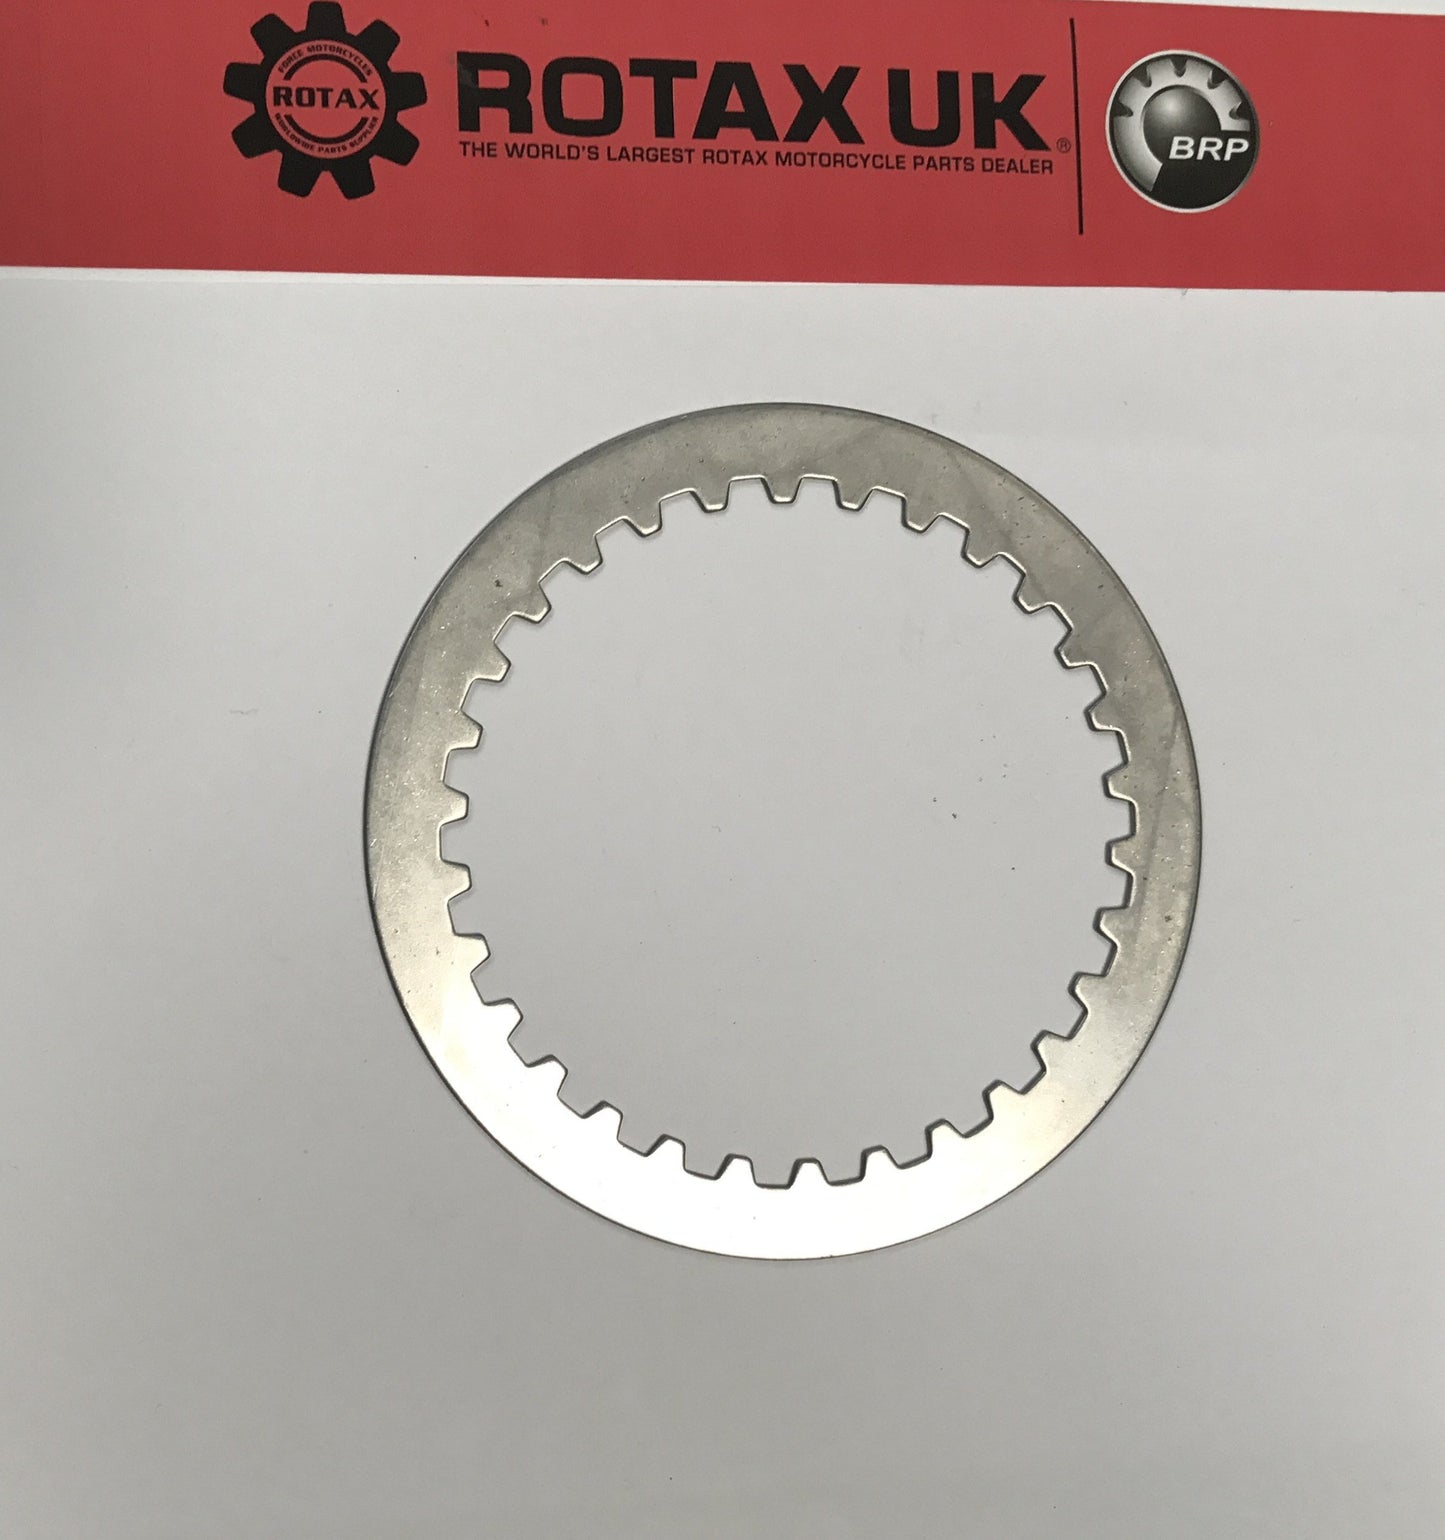 259537 - Clutch Plate for various Rotax engine types.